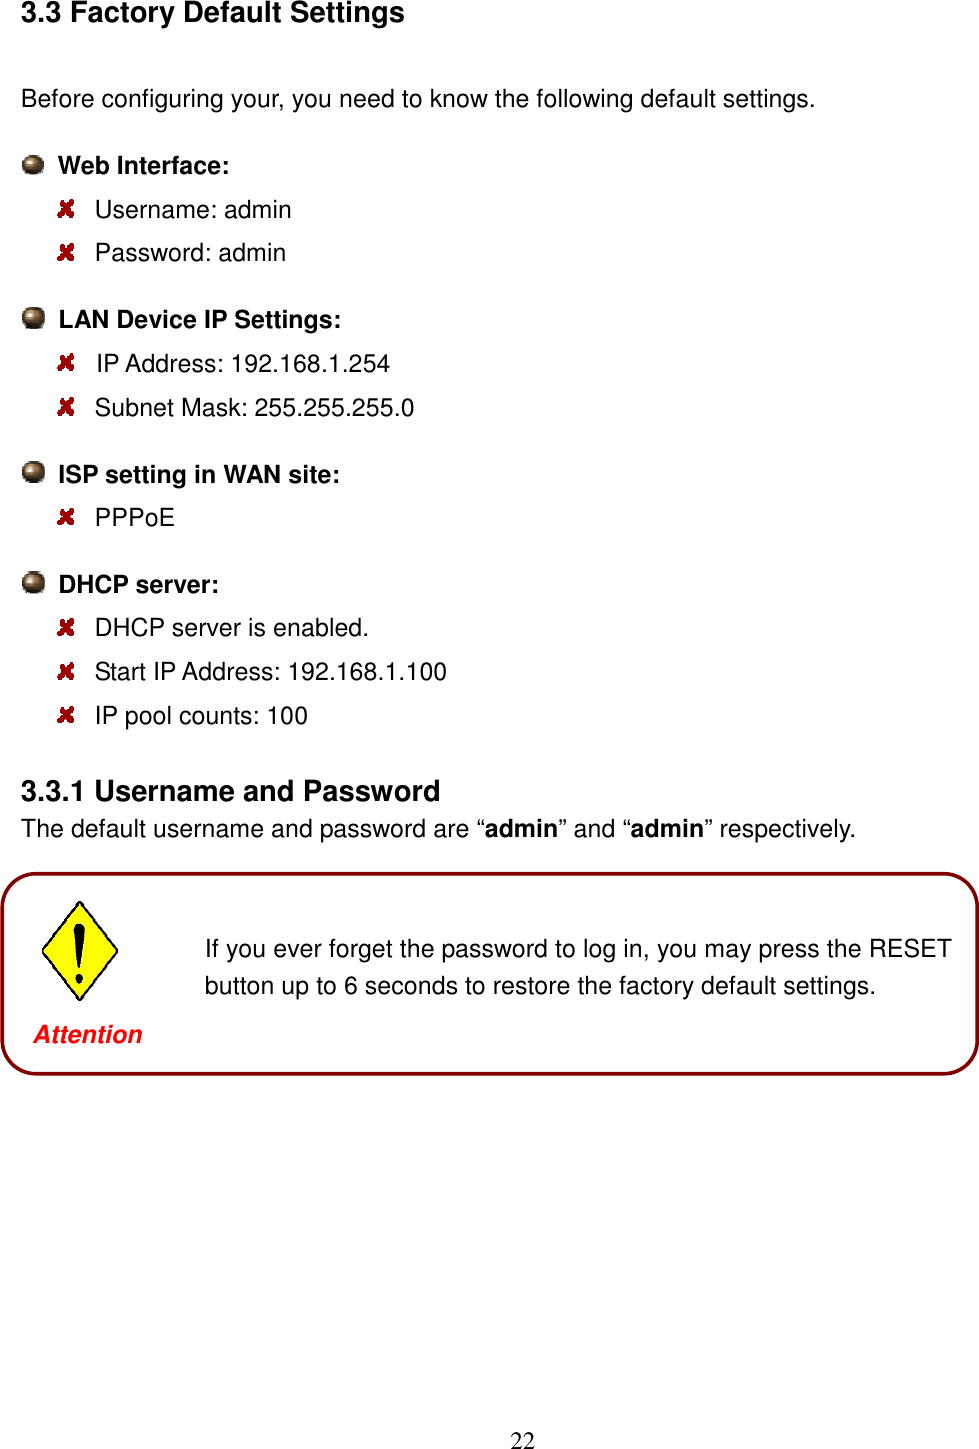 22 3.3 Factory Default Settings Before configuring your, you need to know the following default settings.   Web Interface:  Username: admin  Password: admin   LAN Device IP Settings:    IP Address: 192.168.1.254    Subnet Mask: 255.255.255.0   ISP setting in WAN site:   PPPoE   DHCP server:  DHCP server is enabled.  Start IP Address: 192.168.1.100   IP pool counts: 100 3.3.1 Username and Password The default username and password are “admin” and “admin” respectively.               Attention  If you ever forget the password to log in, you may press the RESET button up to 6 seconds to restore the factory default settings. Attention 